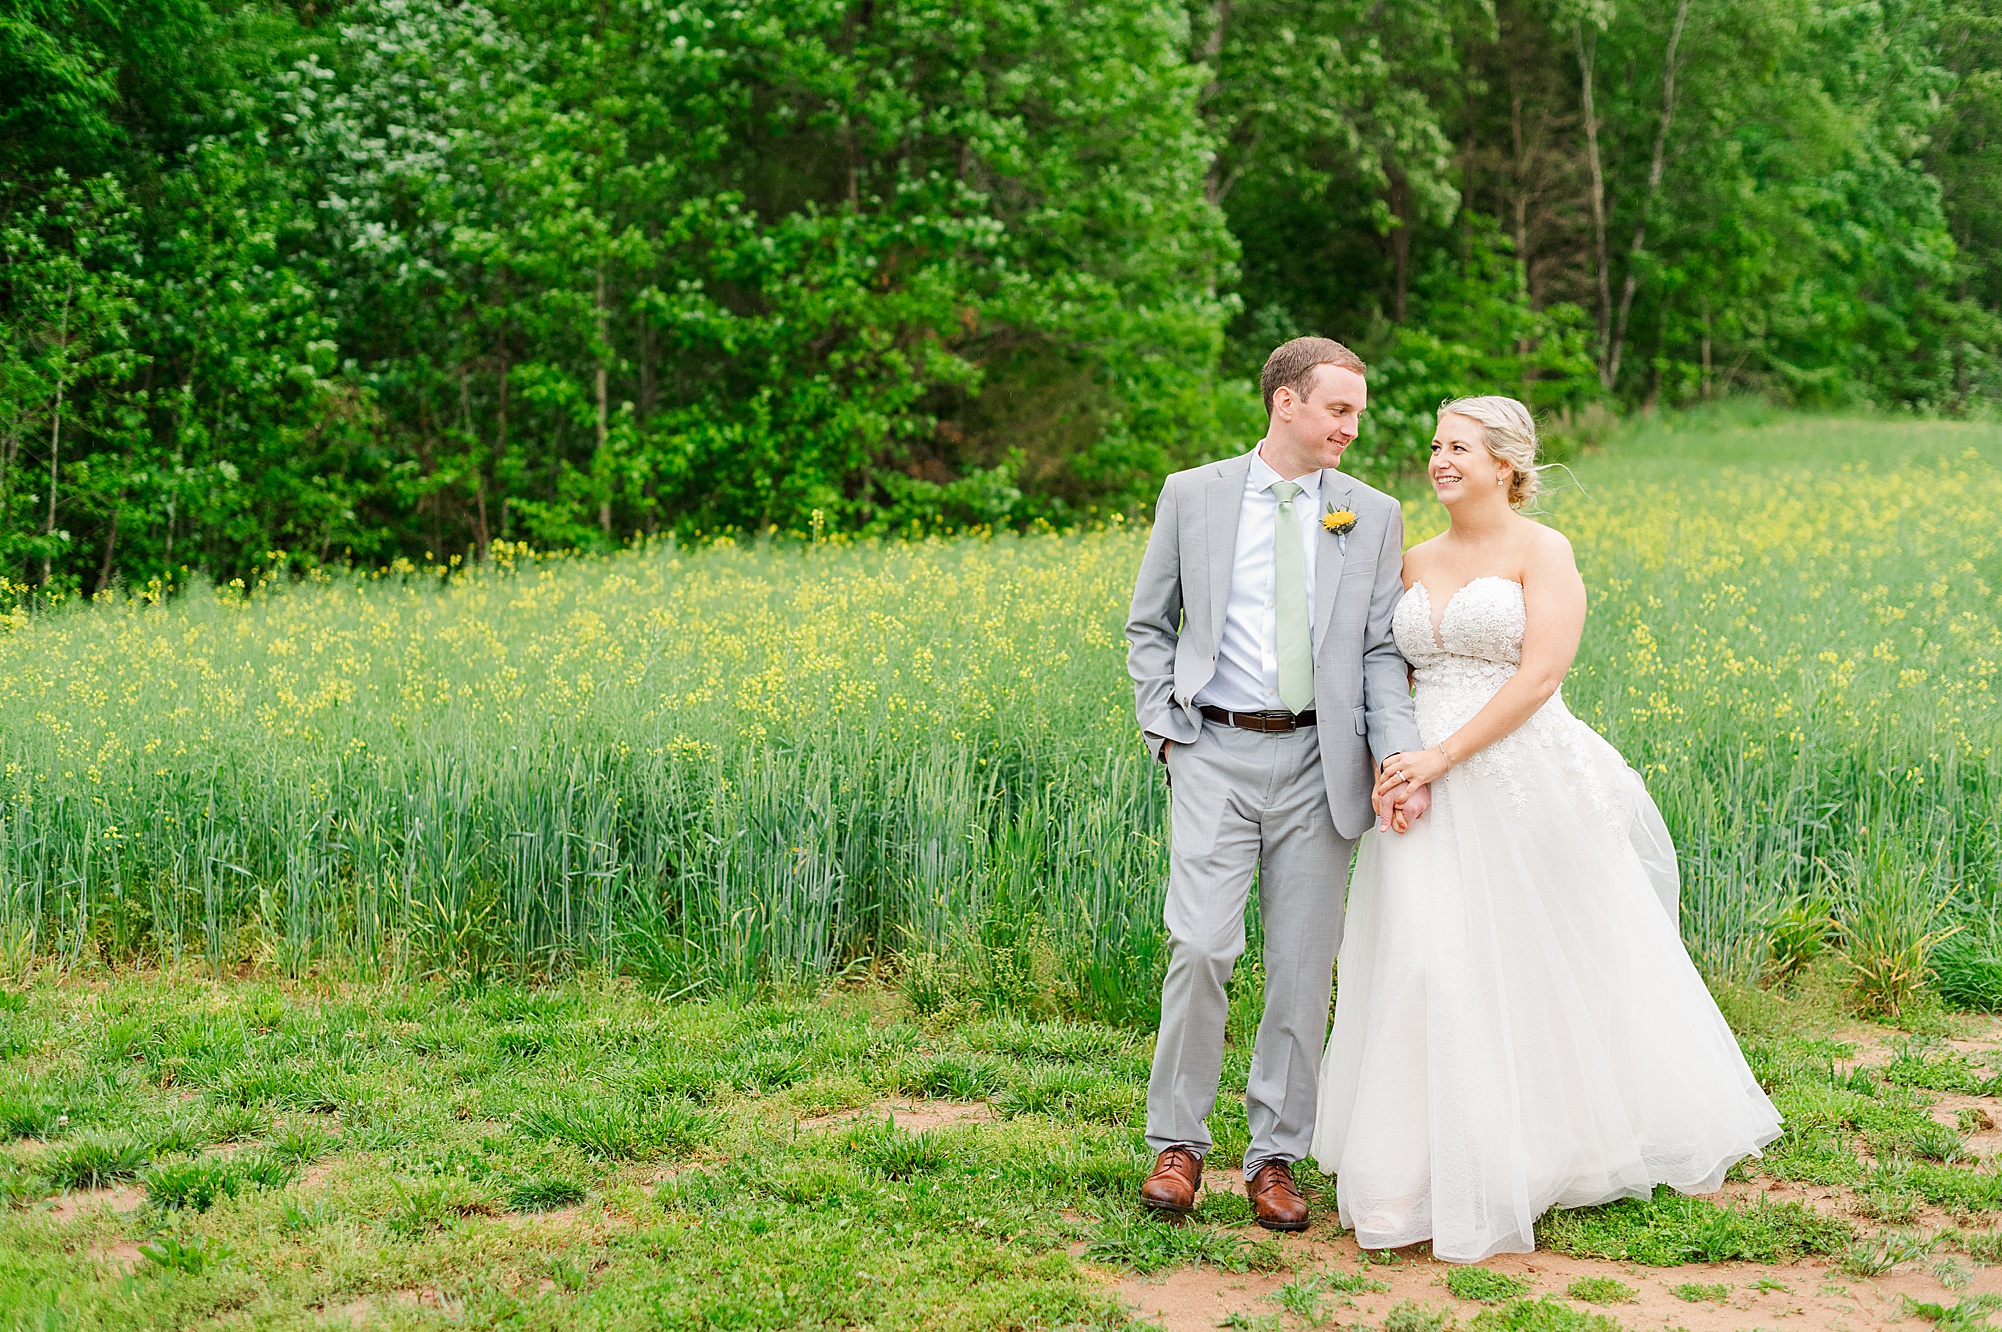 Bride and Groom Photos at Barn at Timber Creek Wedding. Wedding Photography by Kailey Brianne Photography